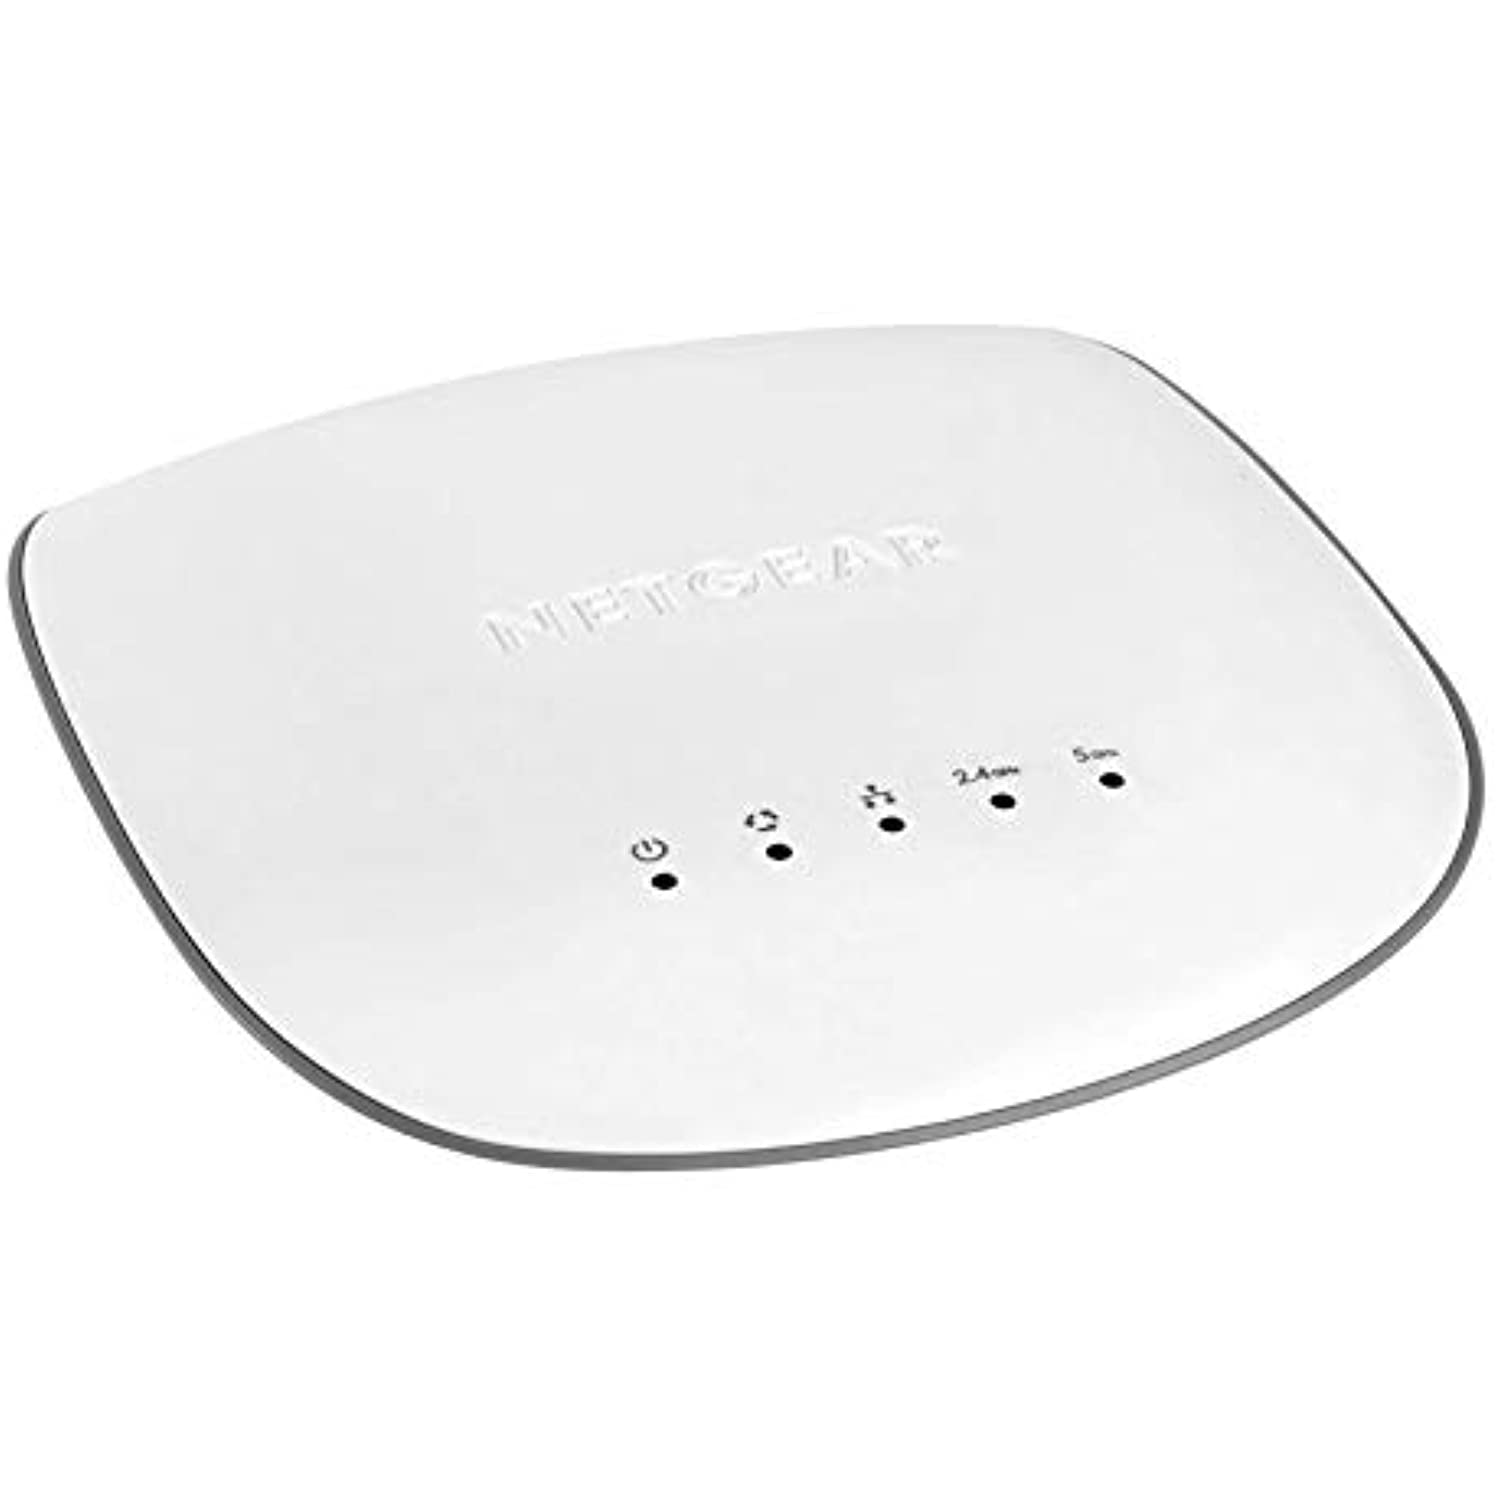 Plus Point and NETGEAR Safety WiFi Access - Insight Fire